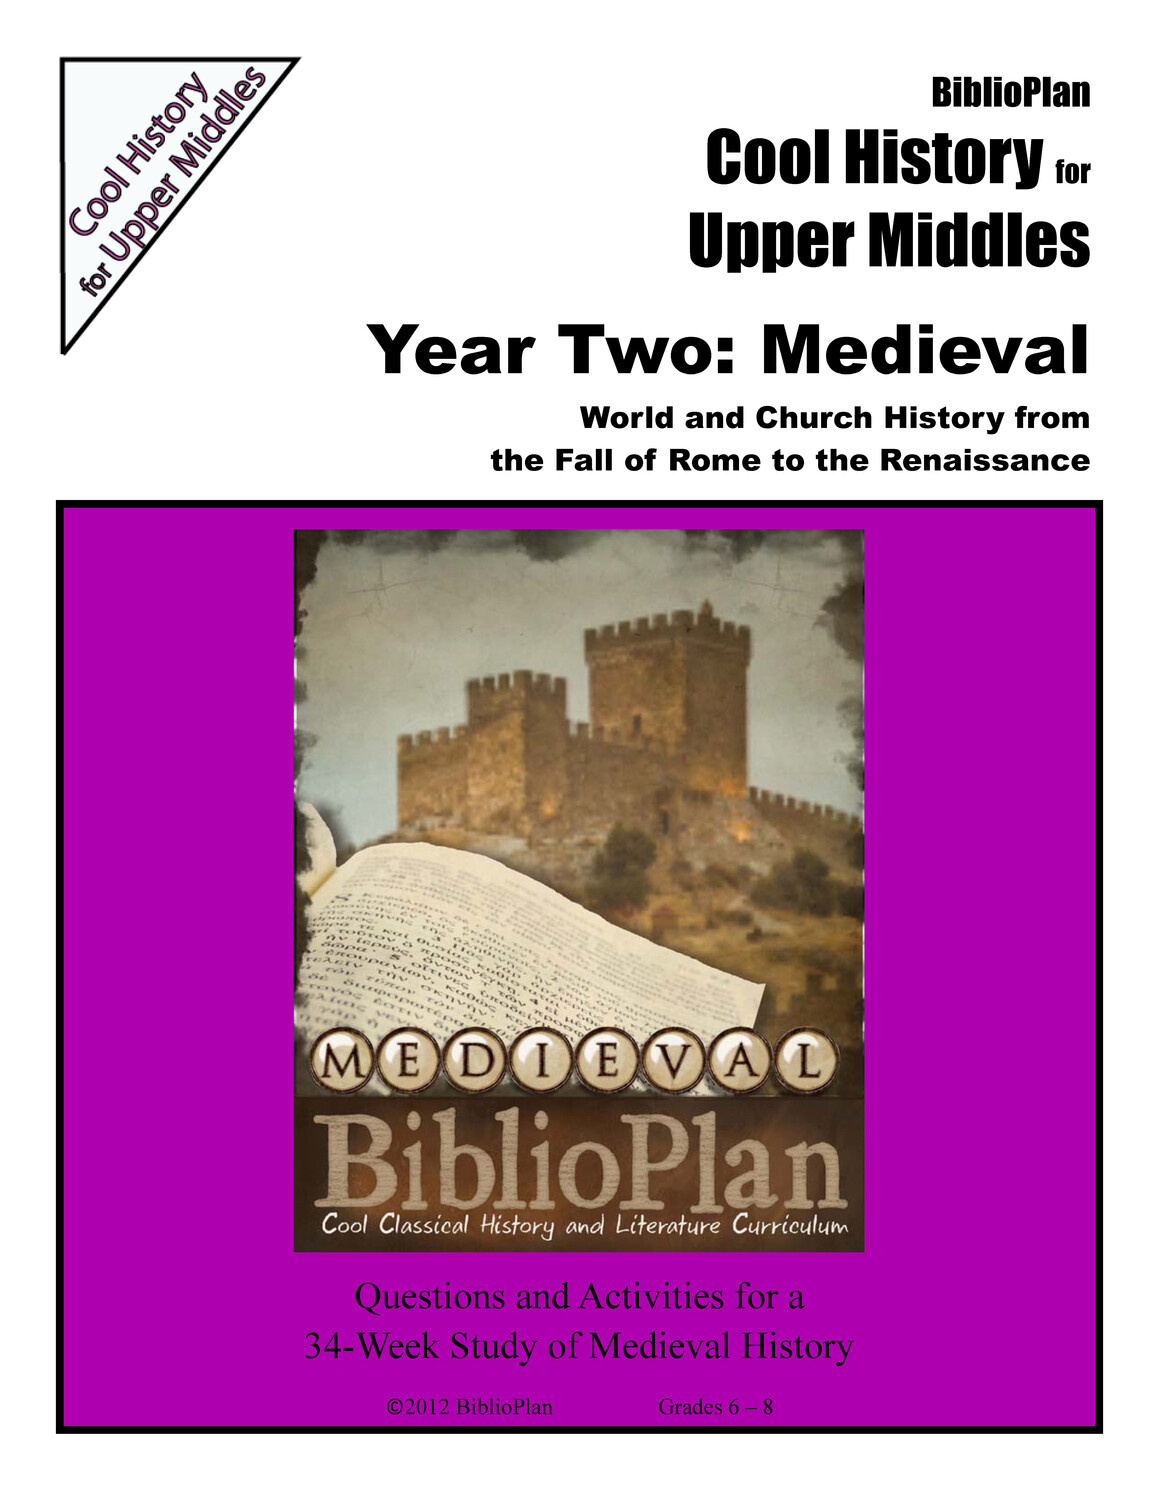 Medieval Cool History for Upper Middles Ebook